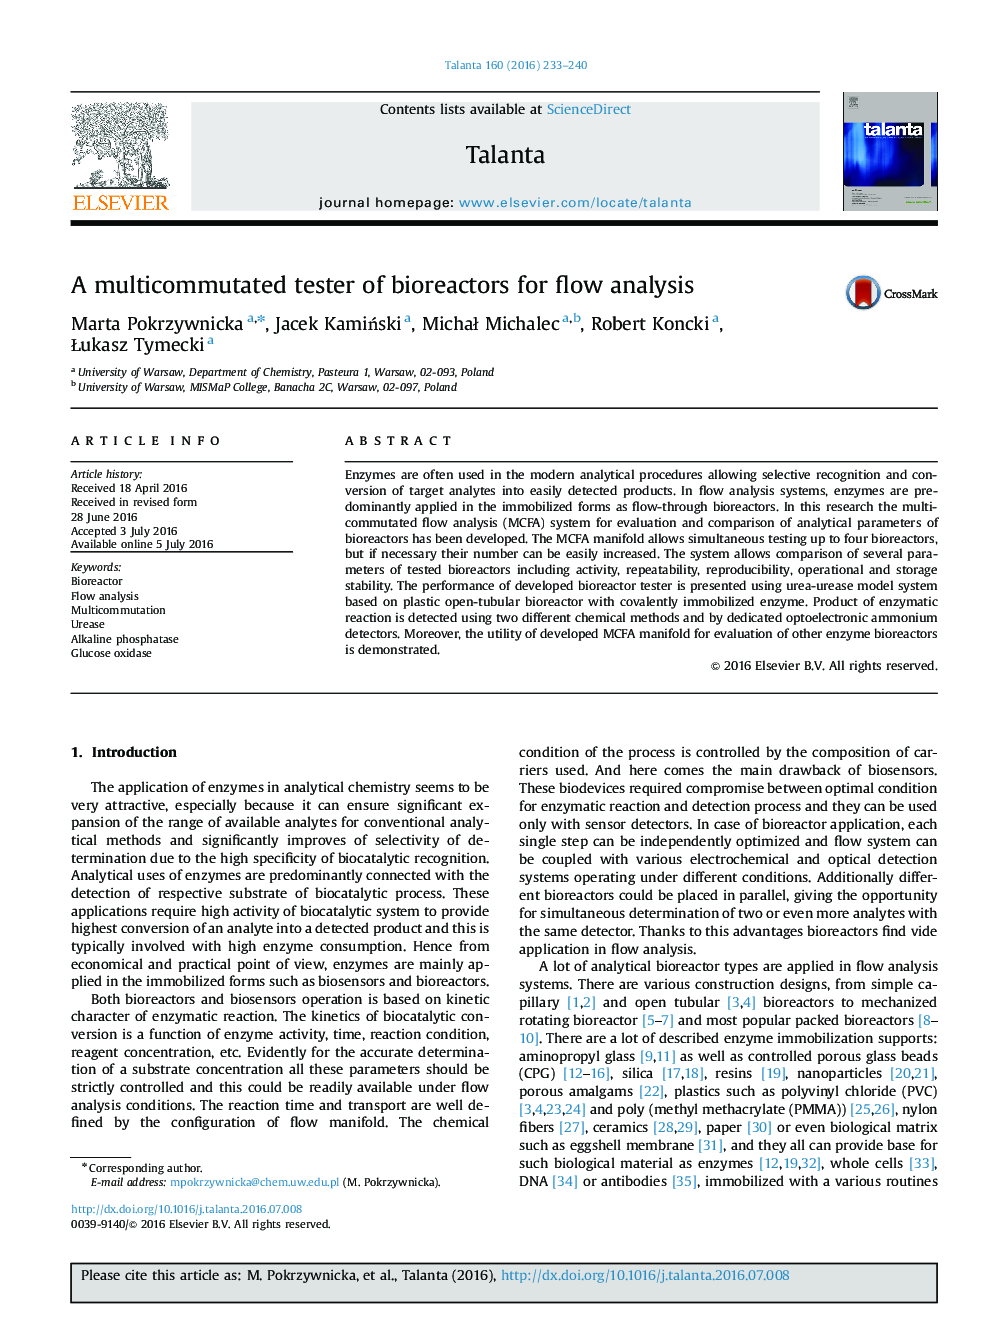 A multicommutated tester of bioreactors for flow analysis